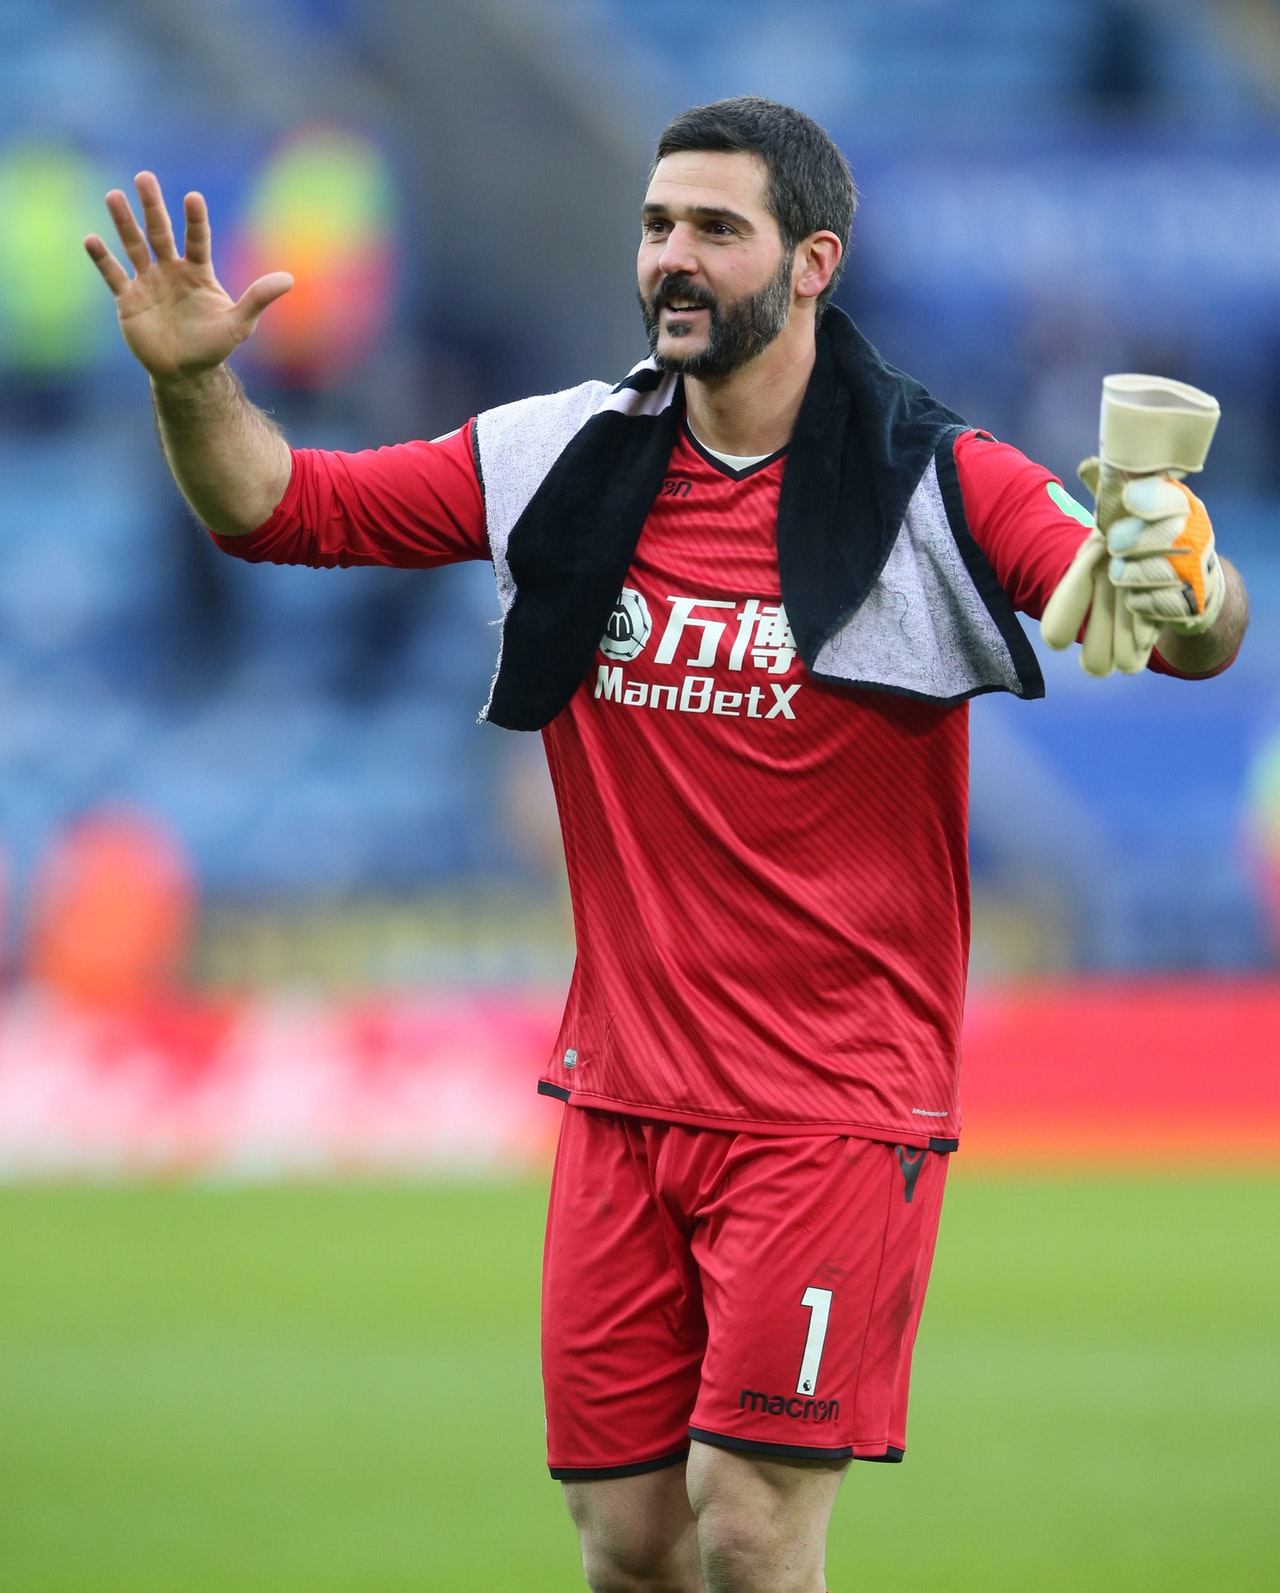 Speroni Pays Tribute To Eagles Fans